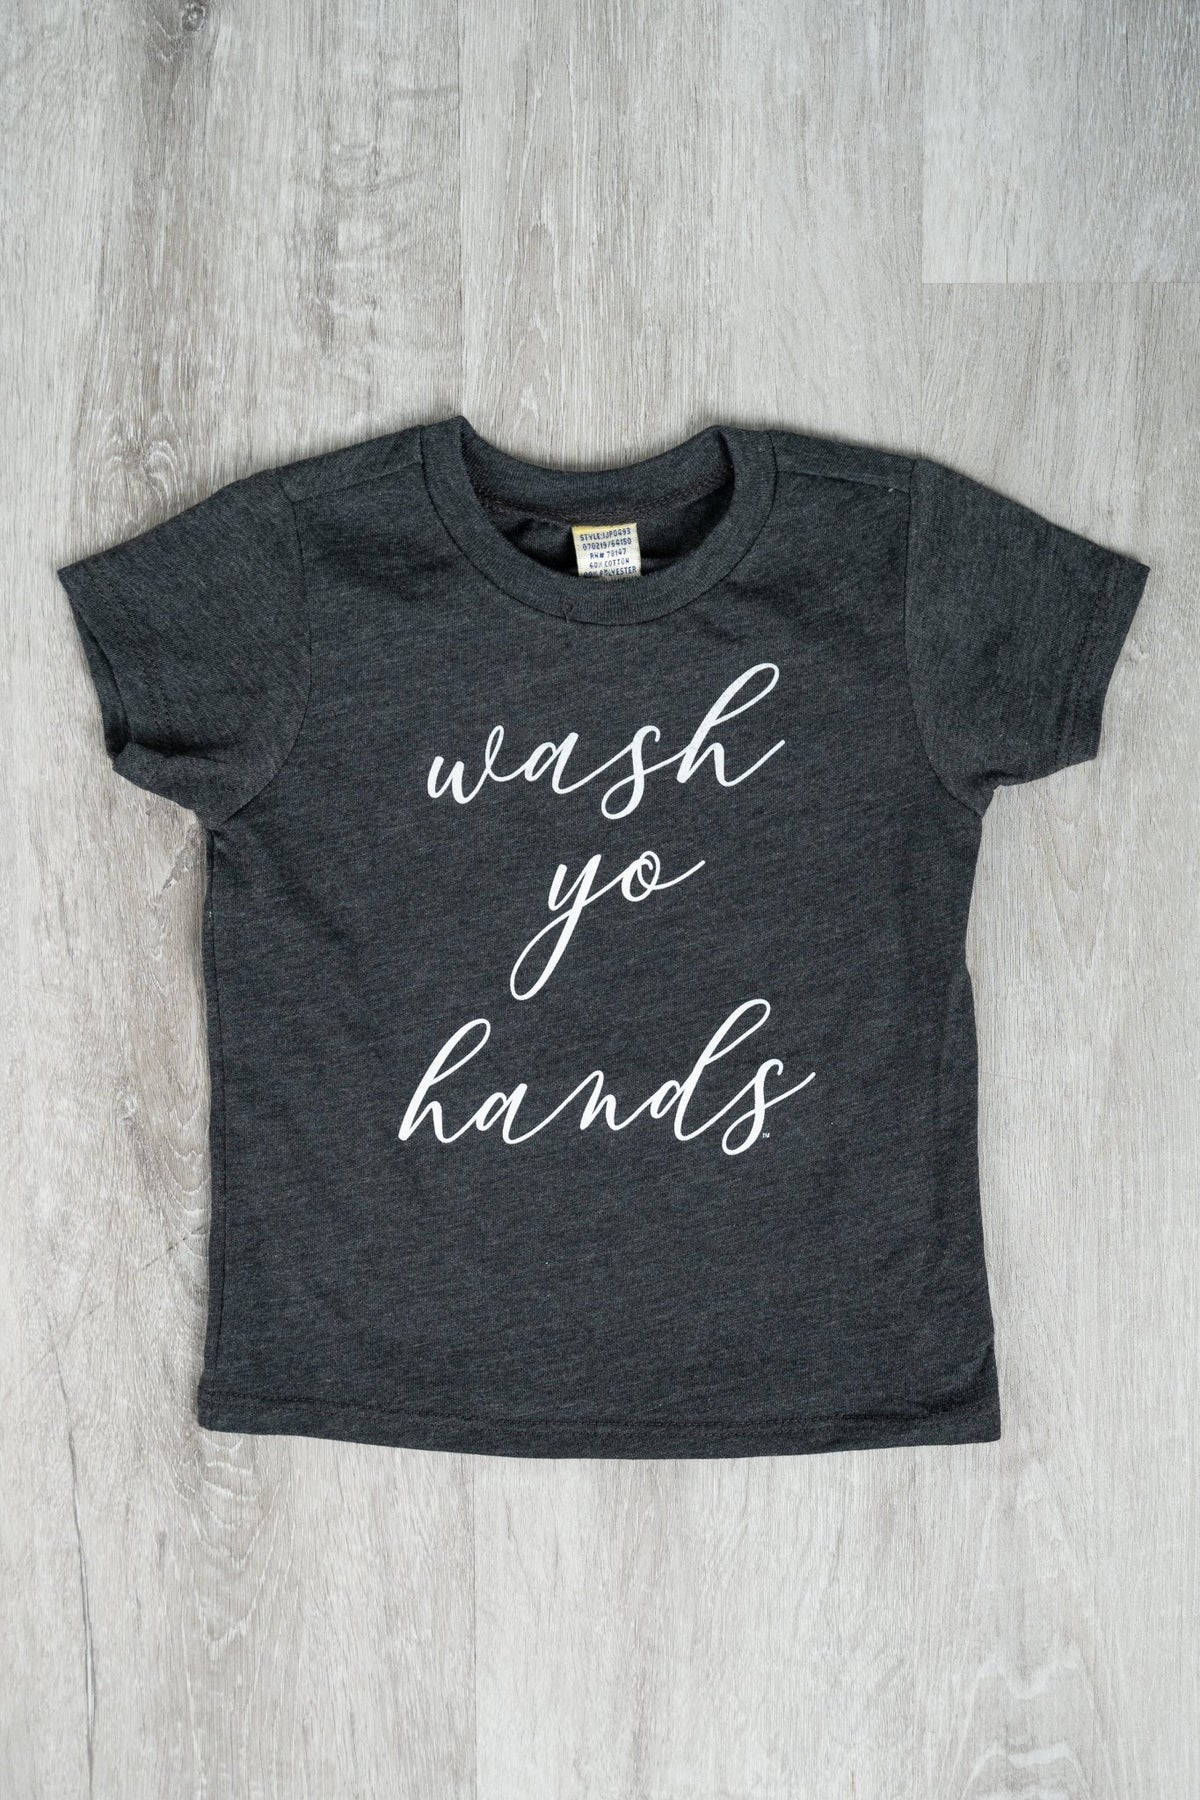 KIDS Wash yo hands t-shirt charcoal - Stylish T-shirts - Trendy Graphic T-Shirts and Tank Tops at Lush Fashion Lounge Boutique in Oklahoma City